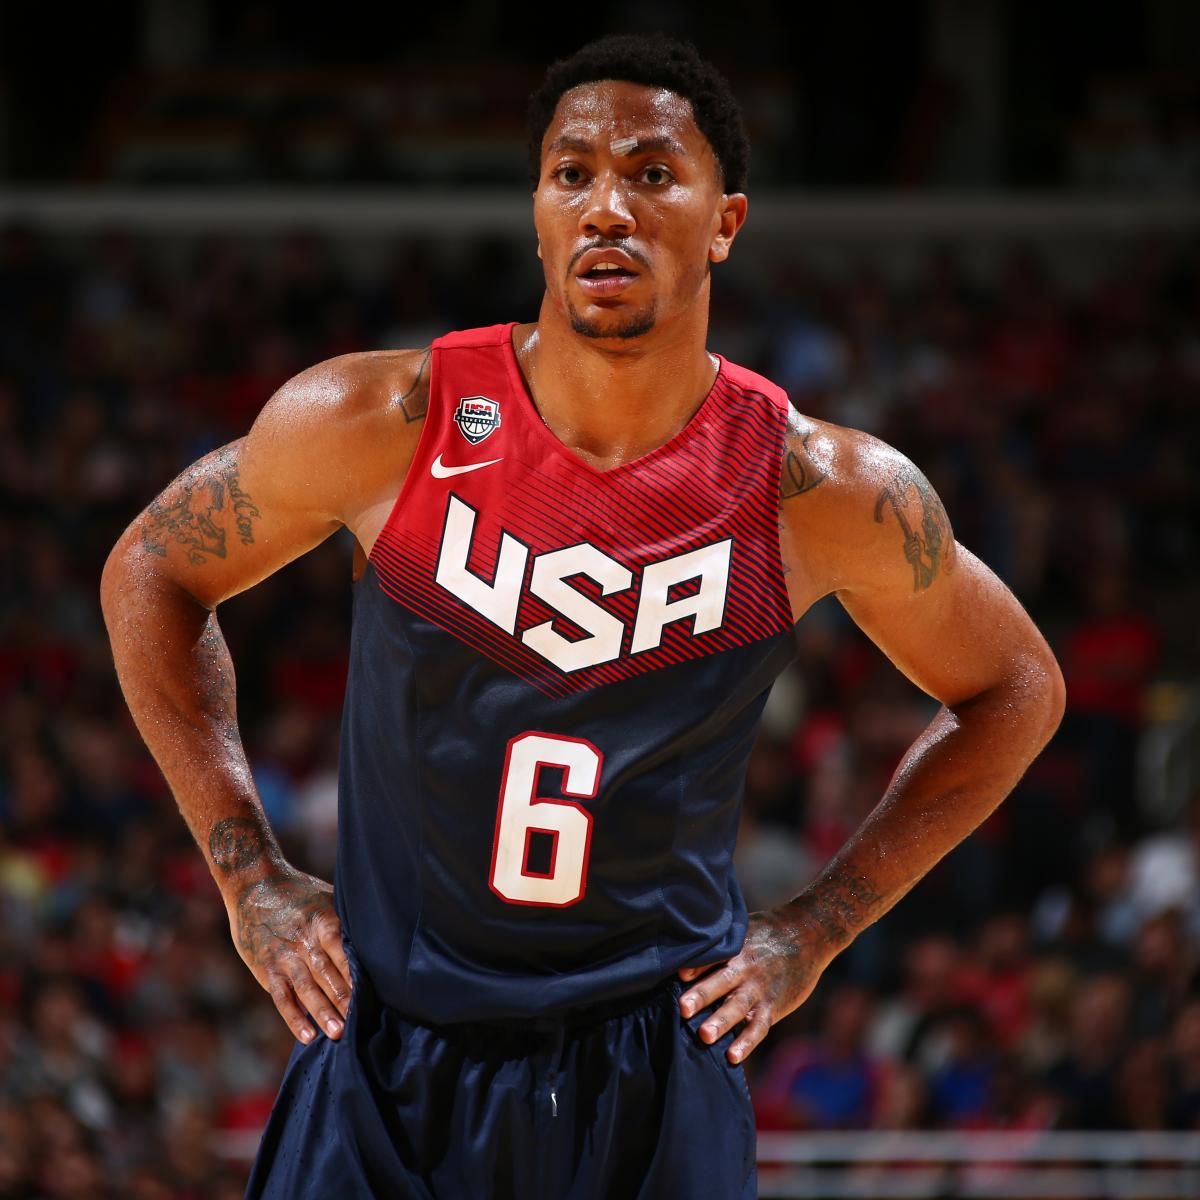 2010 FIBA World Championship: Derrick Rose and Team USA's Top Talent, News, Scores, Highlights, Stats, and Rumors